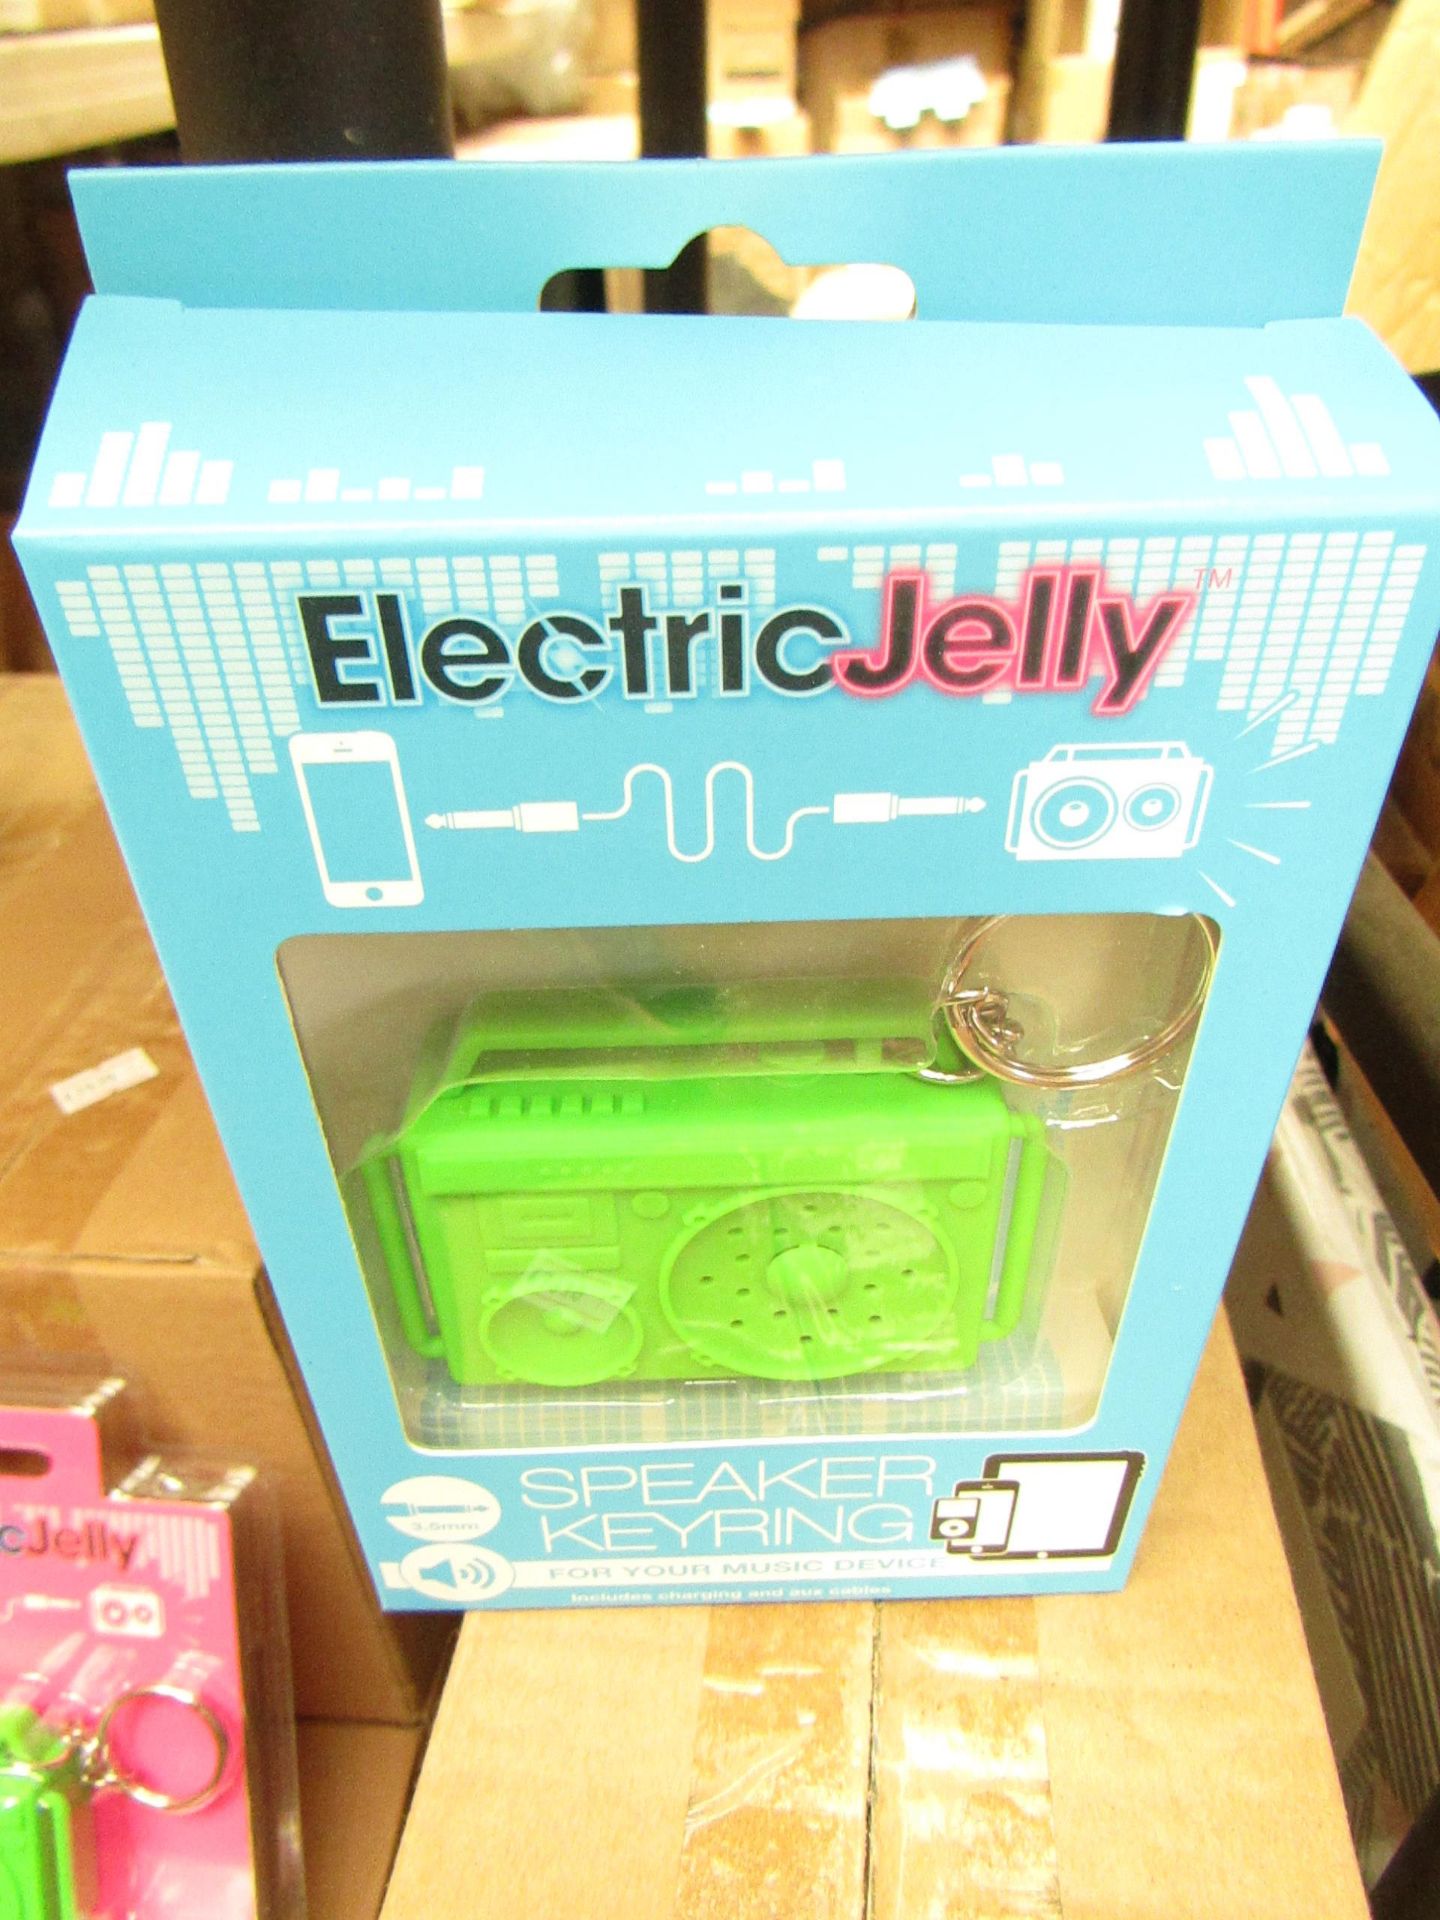 6x Electric Jelly speaker keyring, new and packaged.